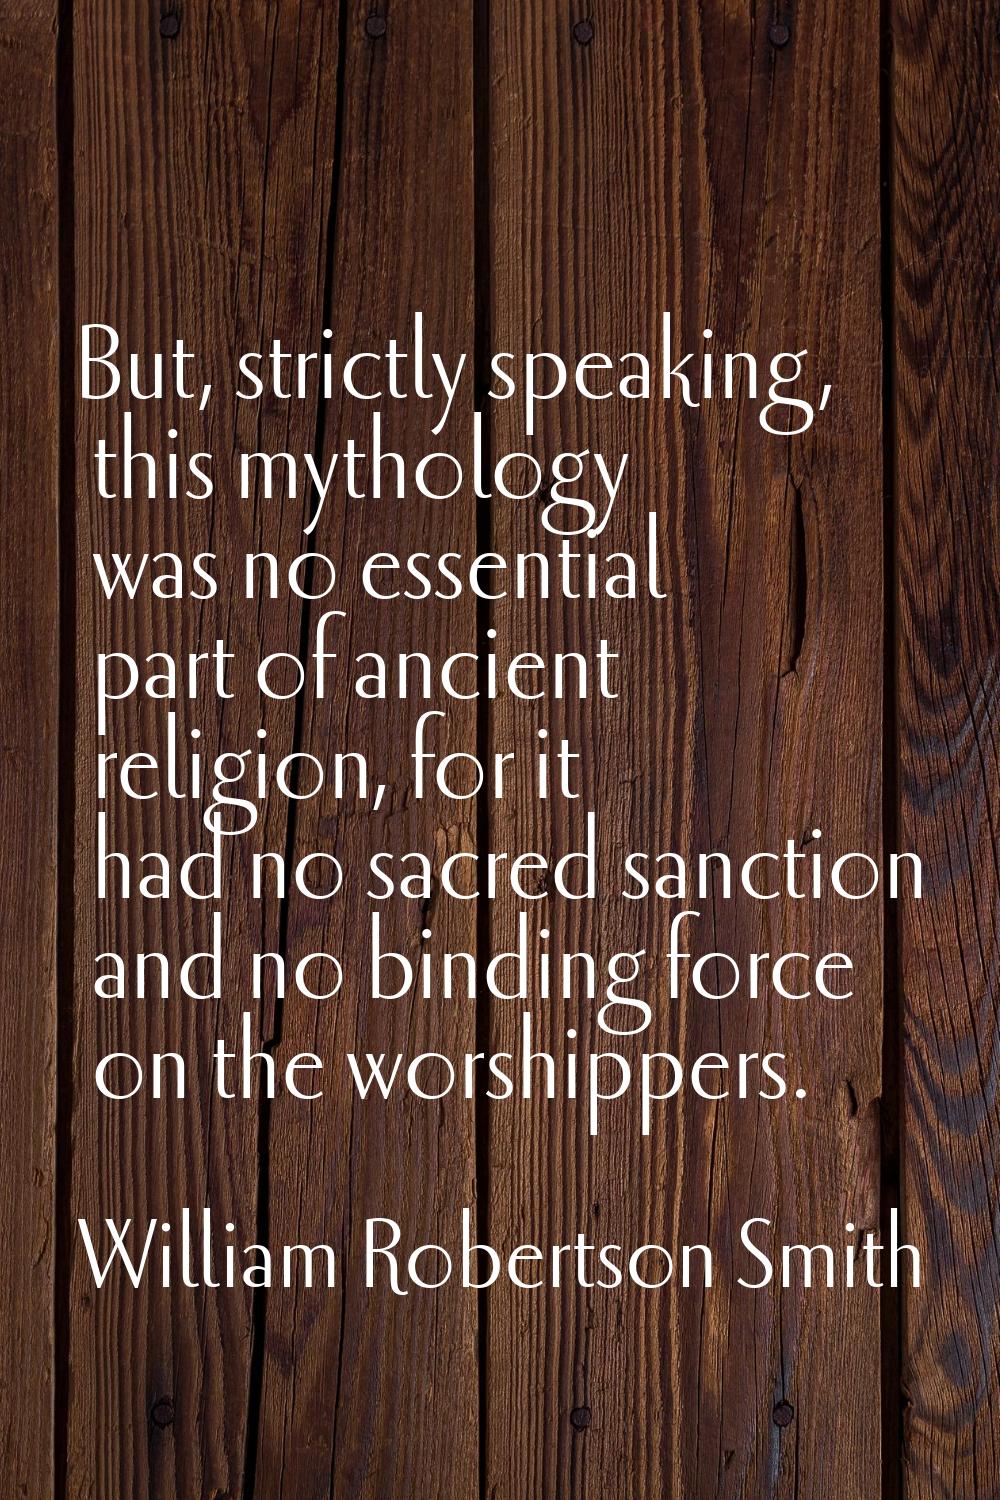 But, strictly speaking, this mythology was no essential part of ancient religion, for it had no sac